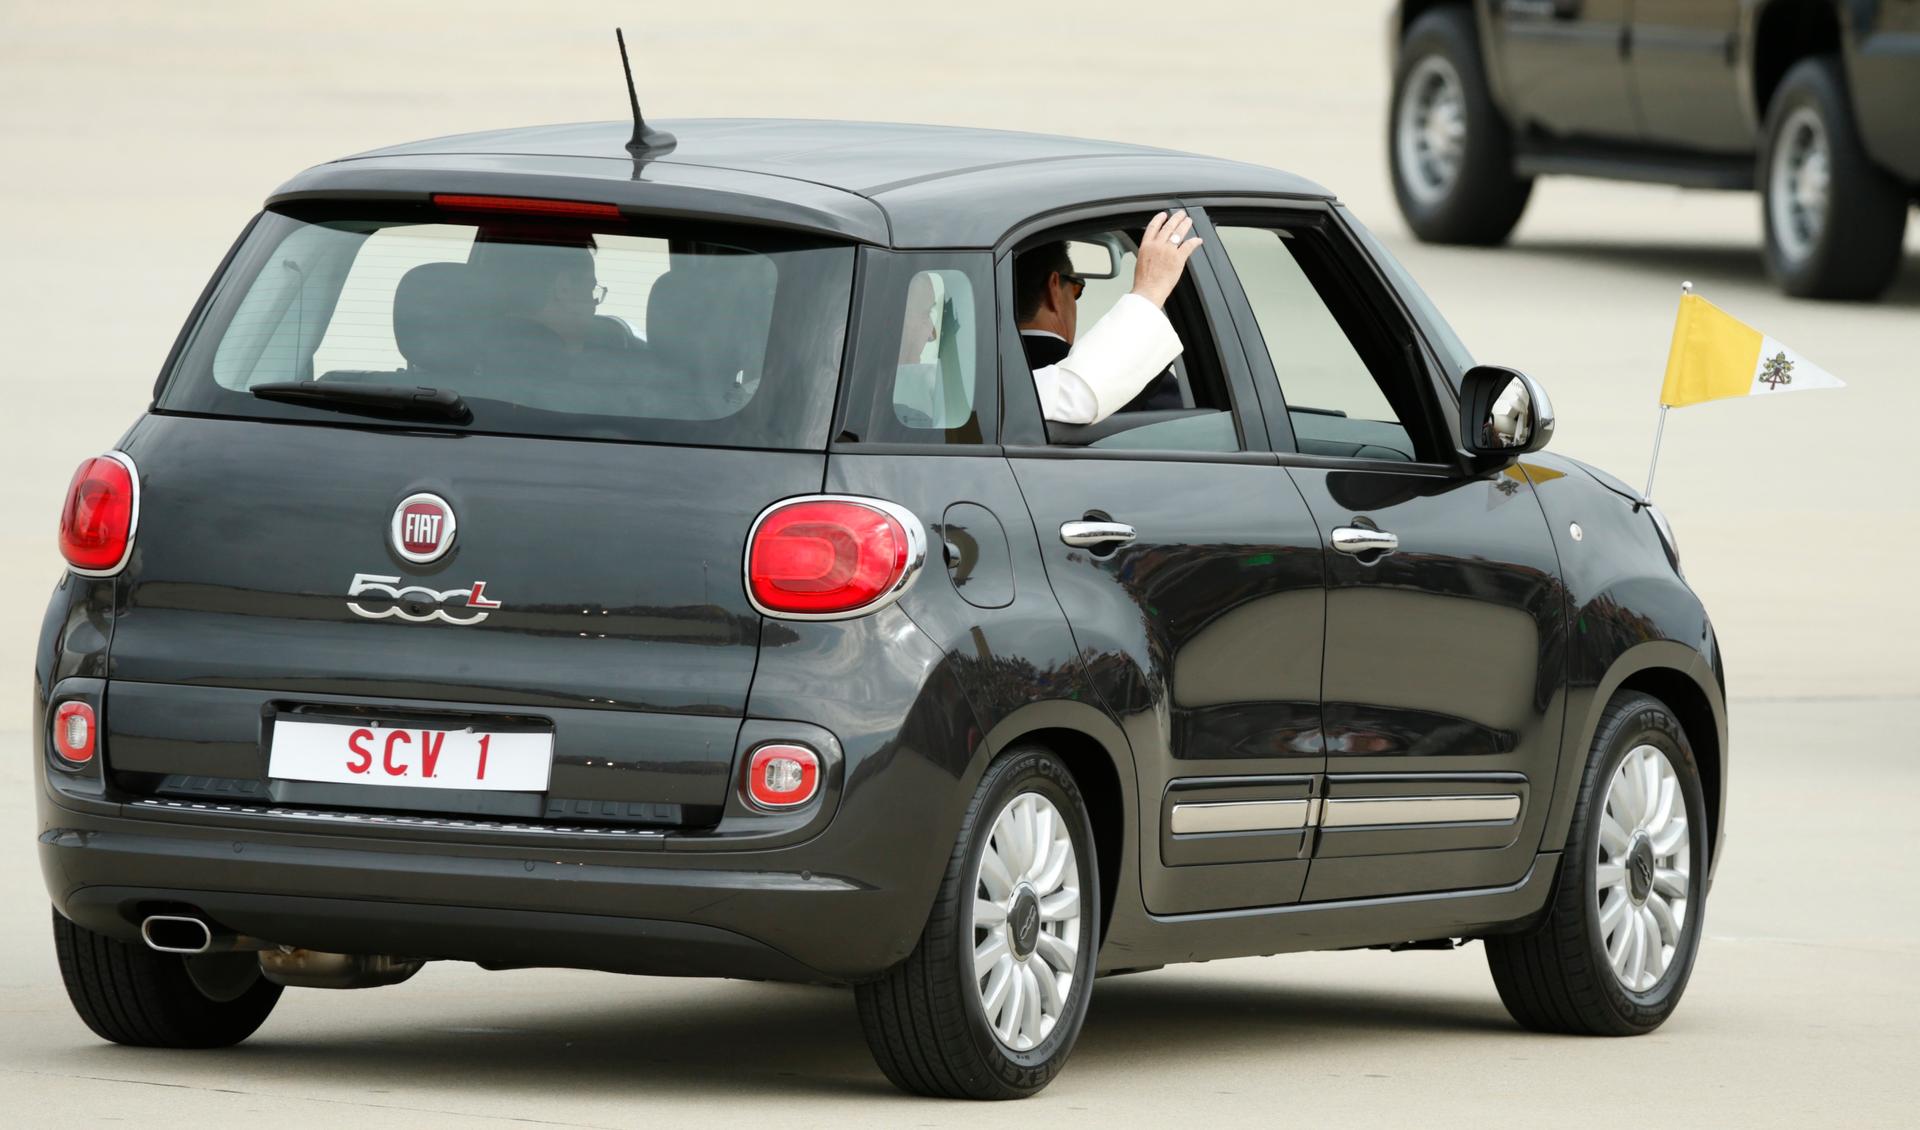 Pope Francis waves as he departs Joint Base Andrews, Maryland, in a Fiat 500 after arriving for his first trip to the United States. 